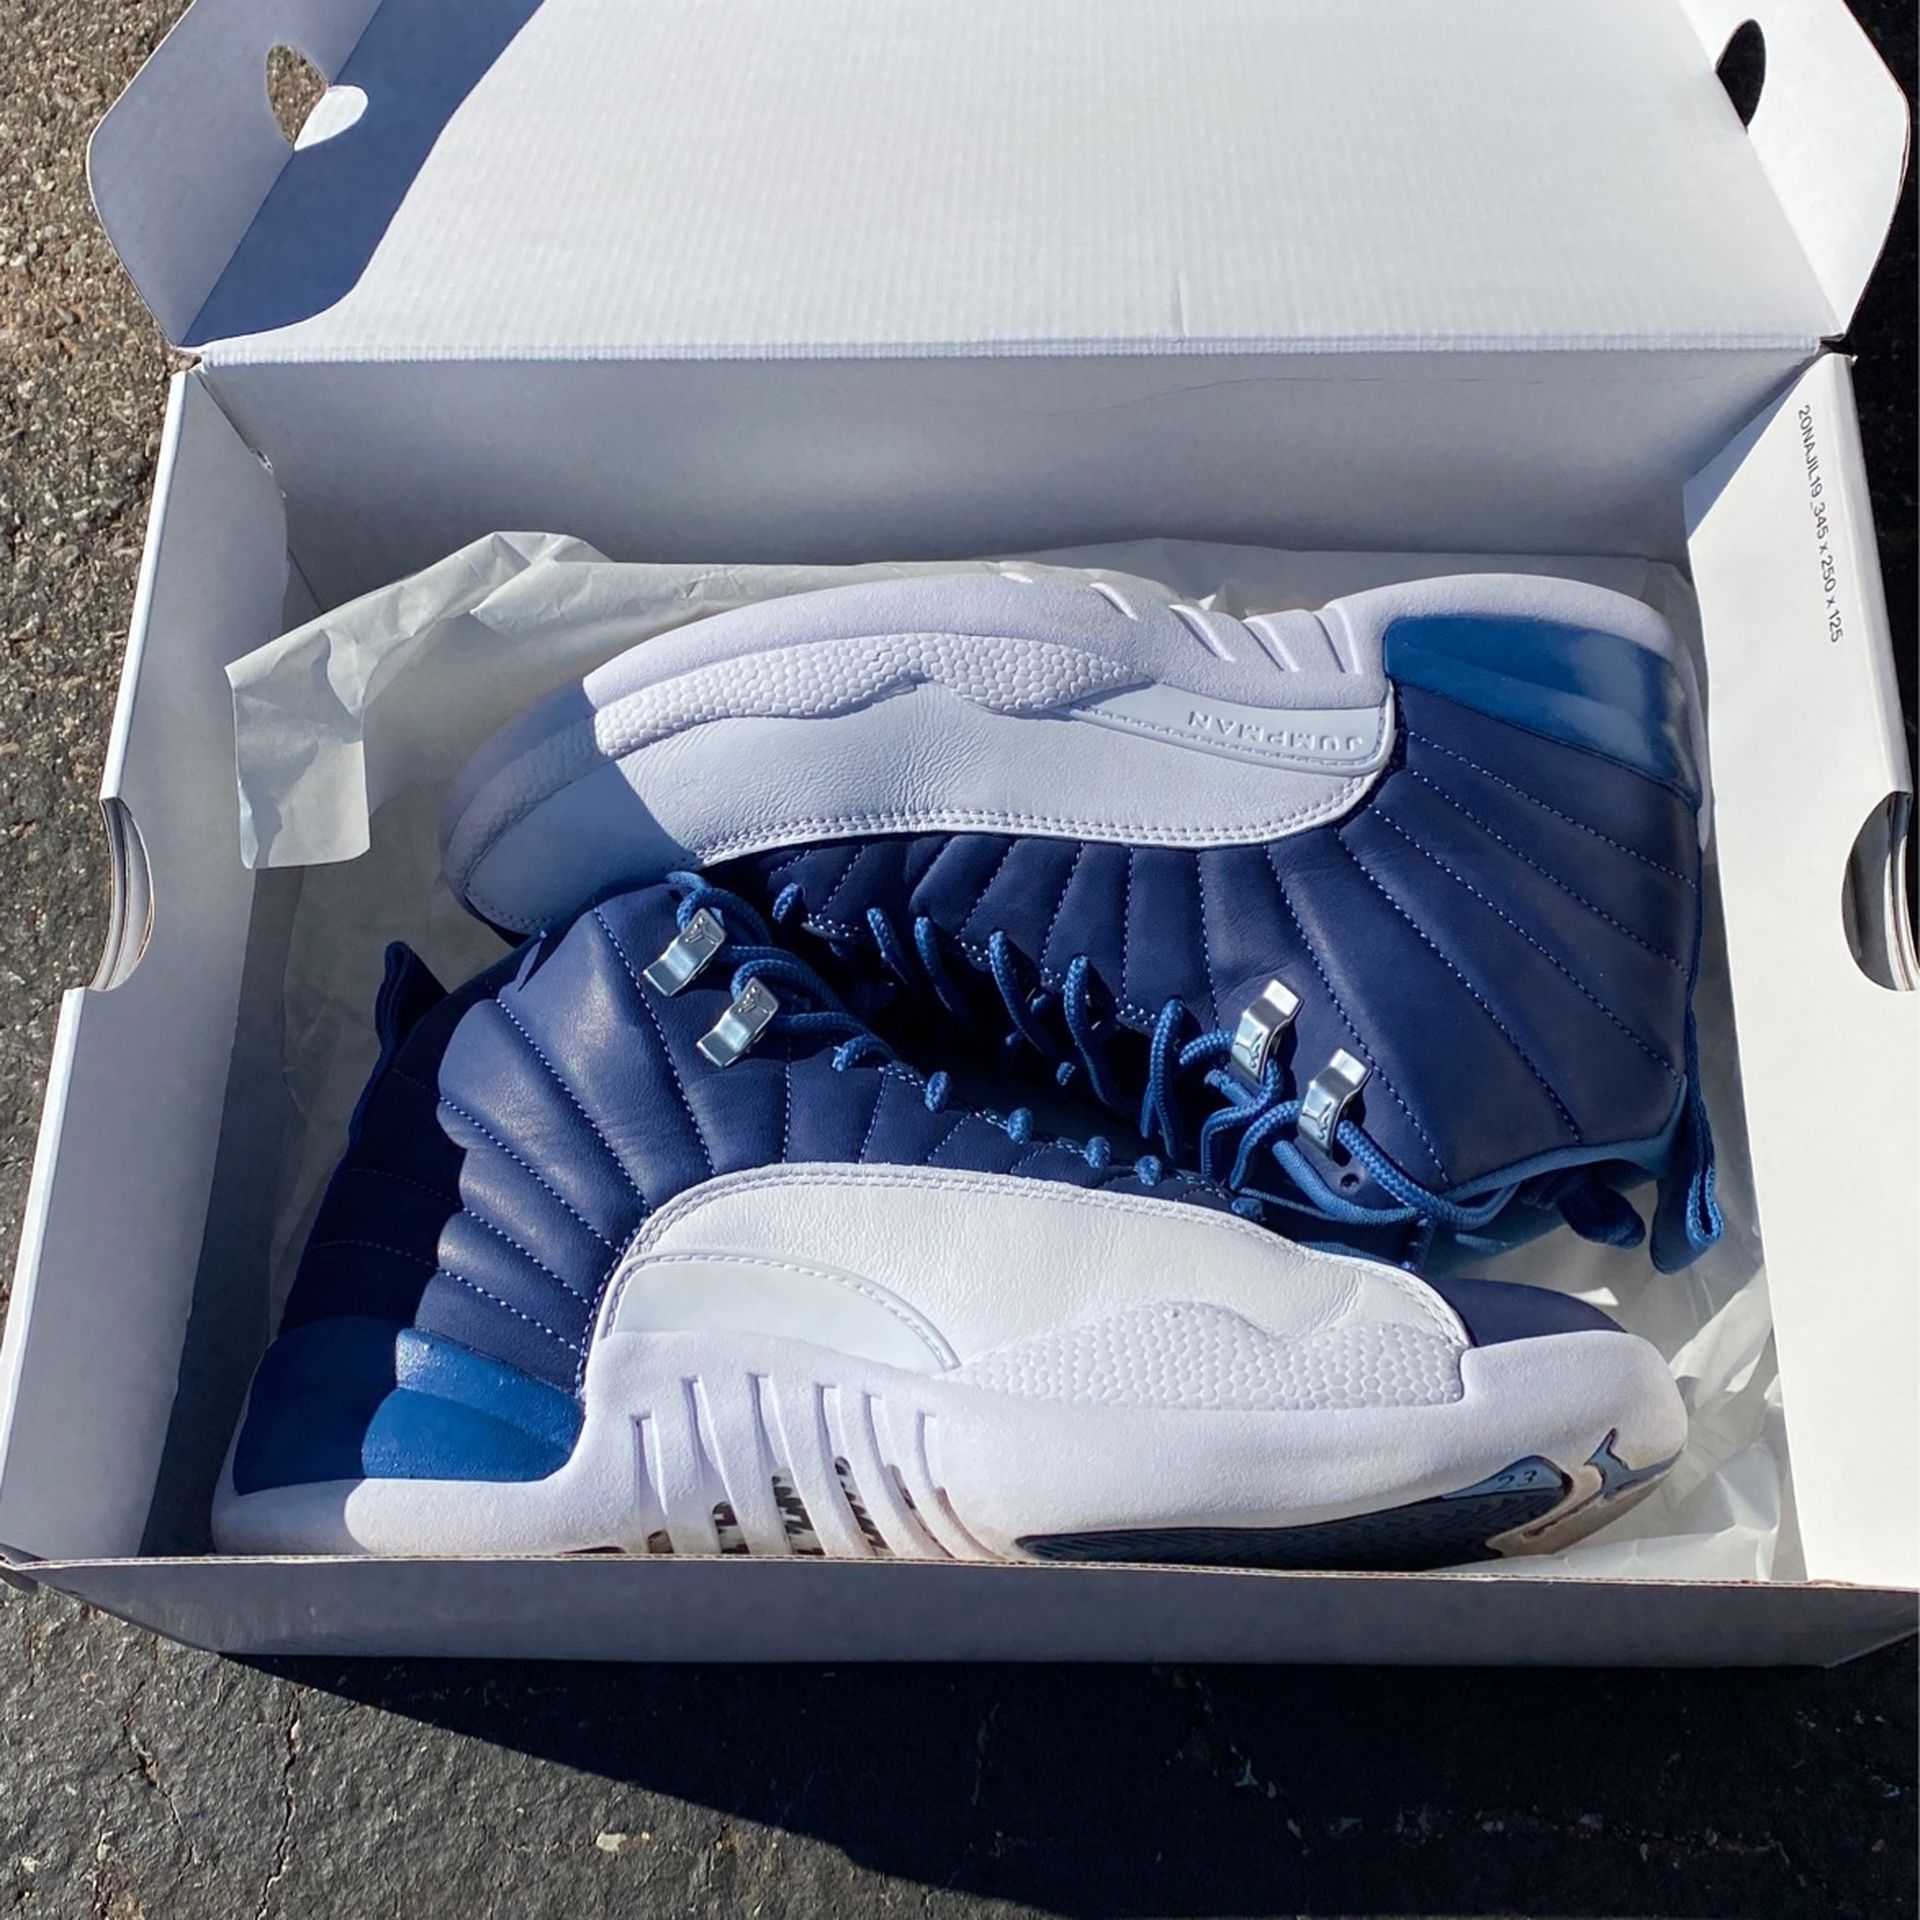 Stone Blue Jordan 12s Size 8’5 Like New Great Condition